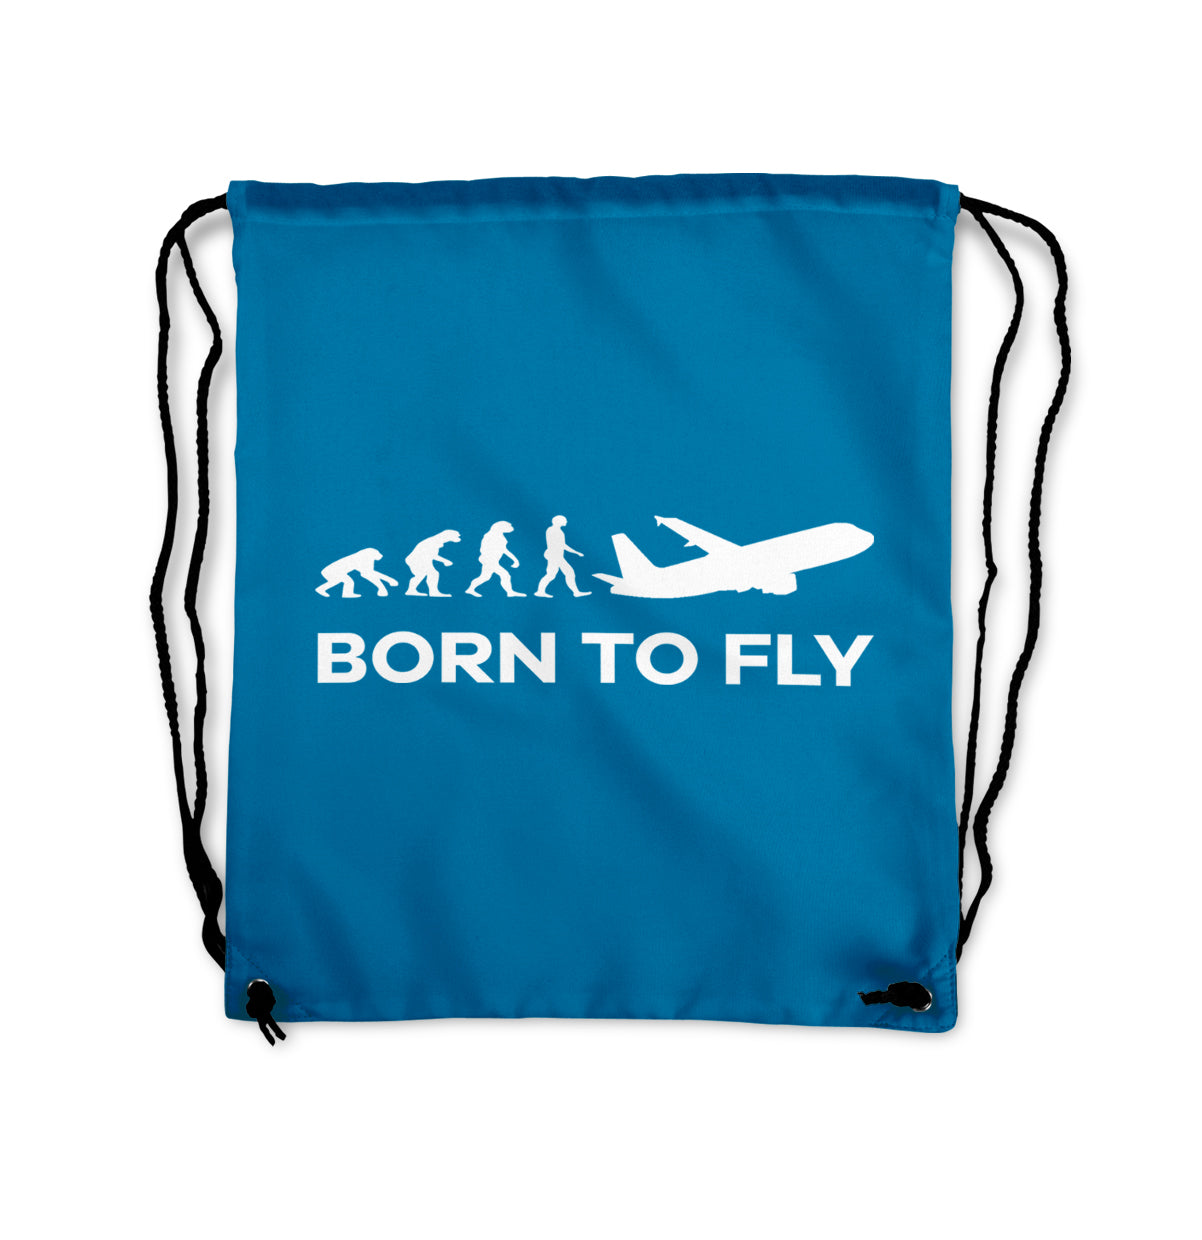 Born To Fly Designed Drawstring Bags